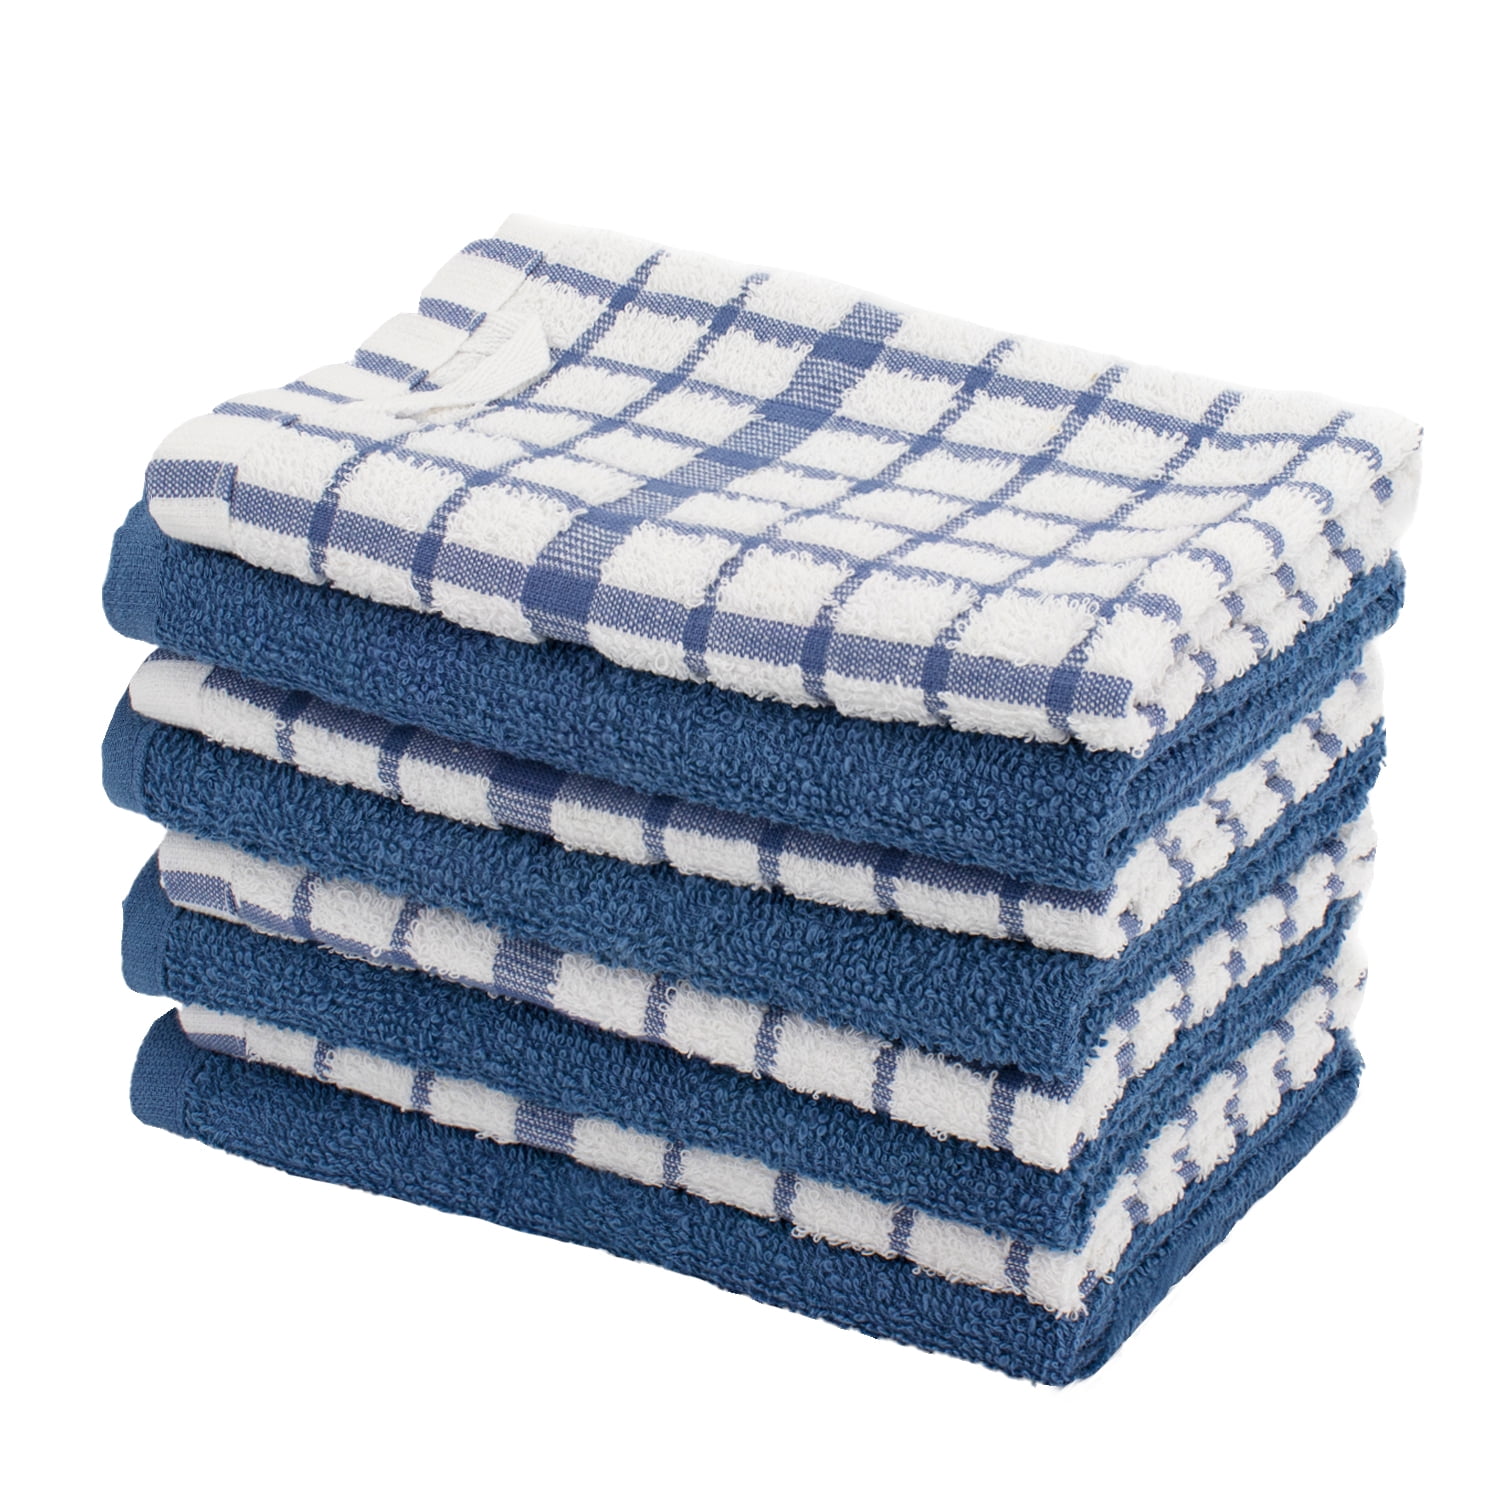 Howarmer Dish Towels for Kitchen, 100% Cotton Grid Dish Rags, Super Soft and Absorbent Dish Cloths, 8 Pack, Size: 12×12, Blue